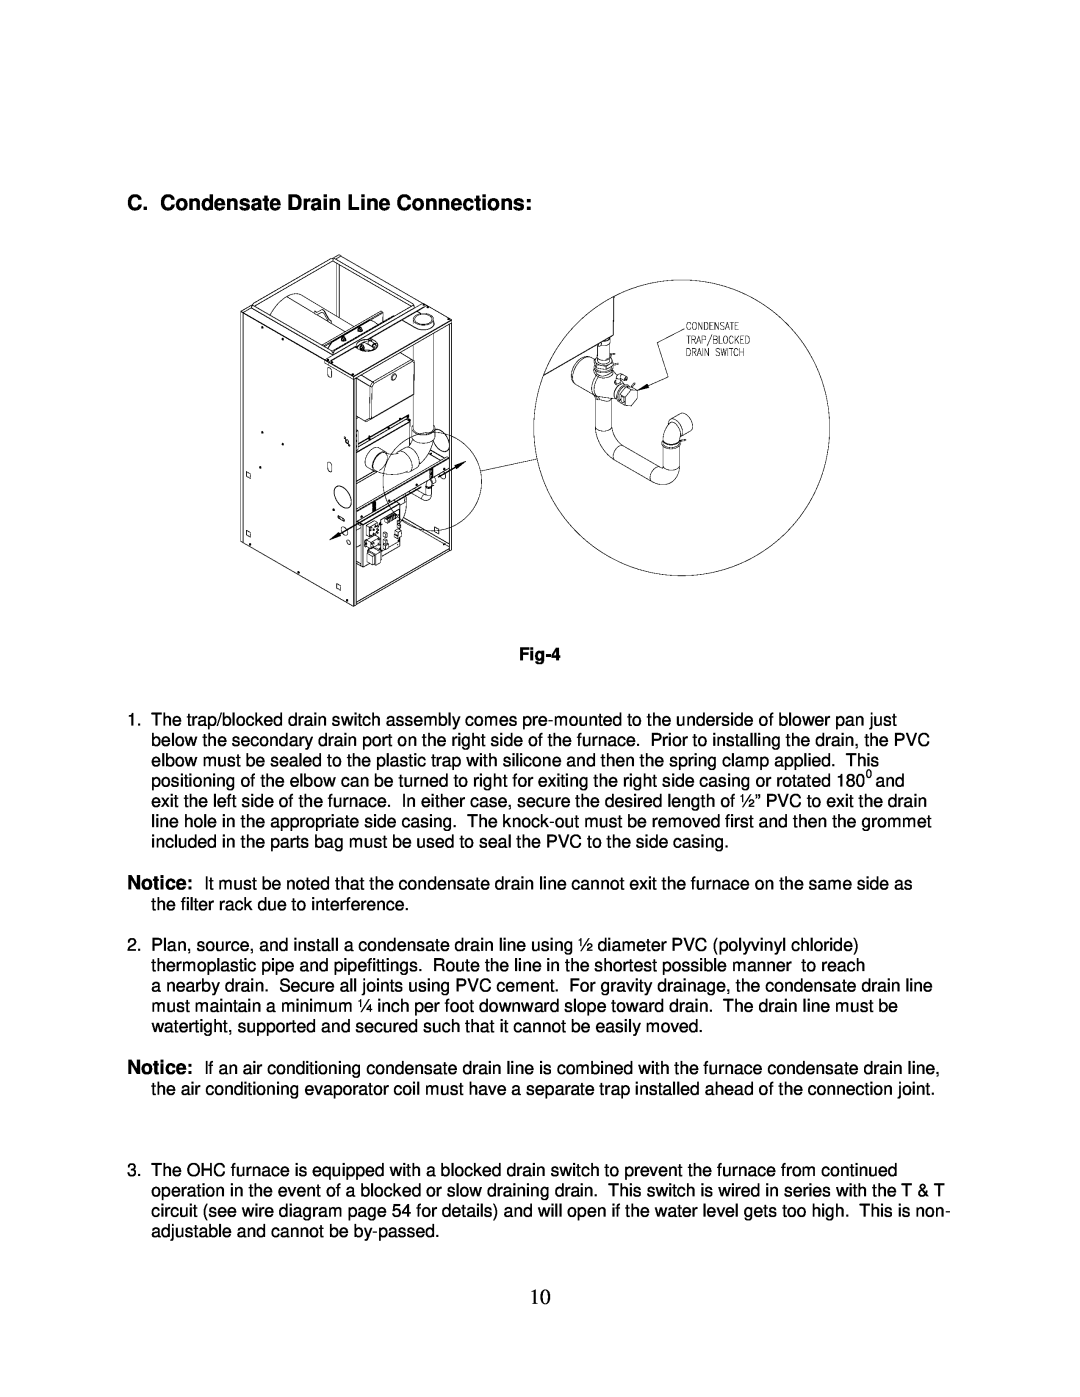 Thermo Products PHCFA072DV4R operation manual C. Condensate Drain Line Connections, Fig-4 